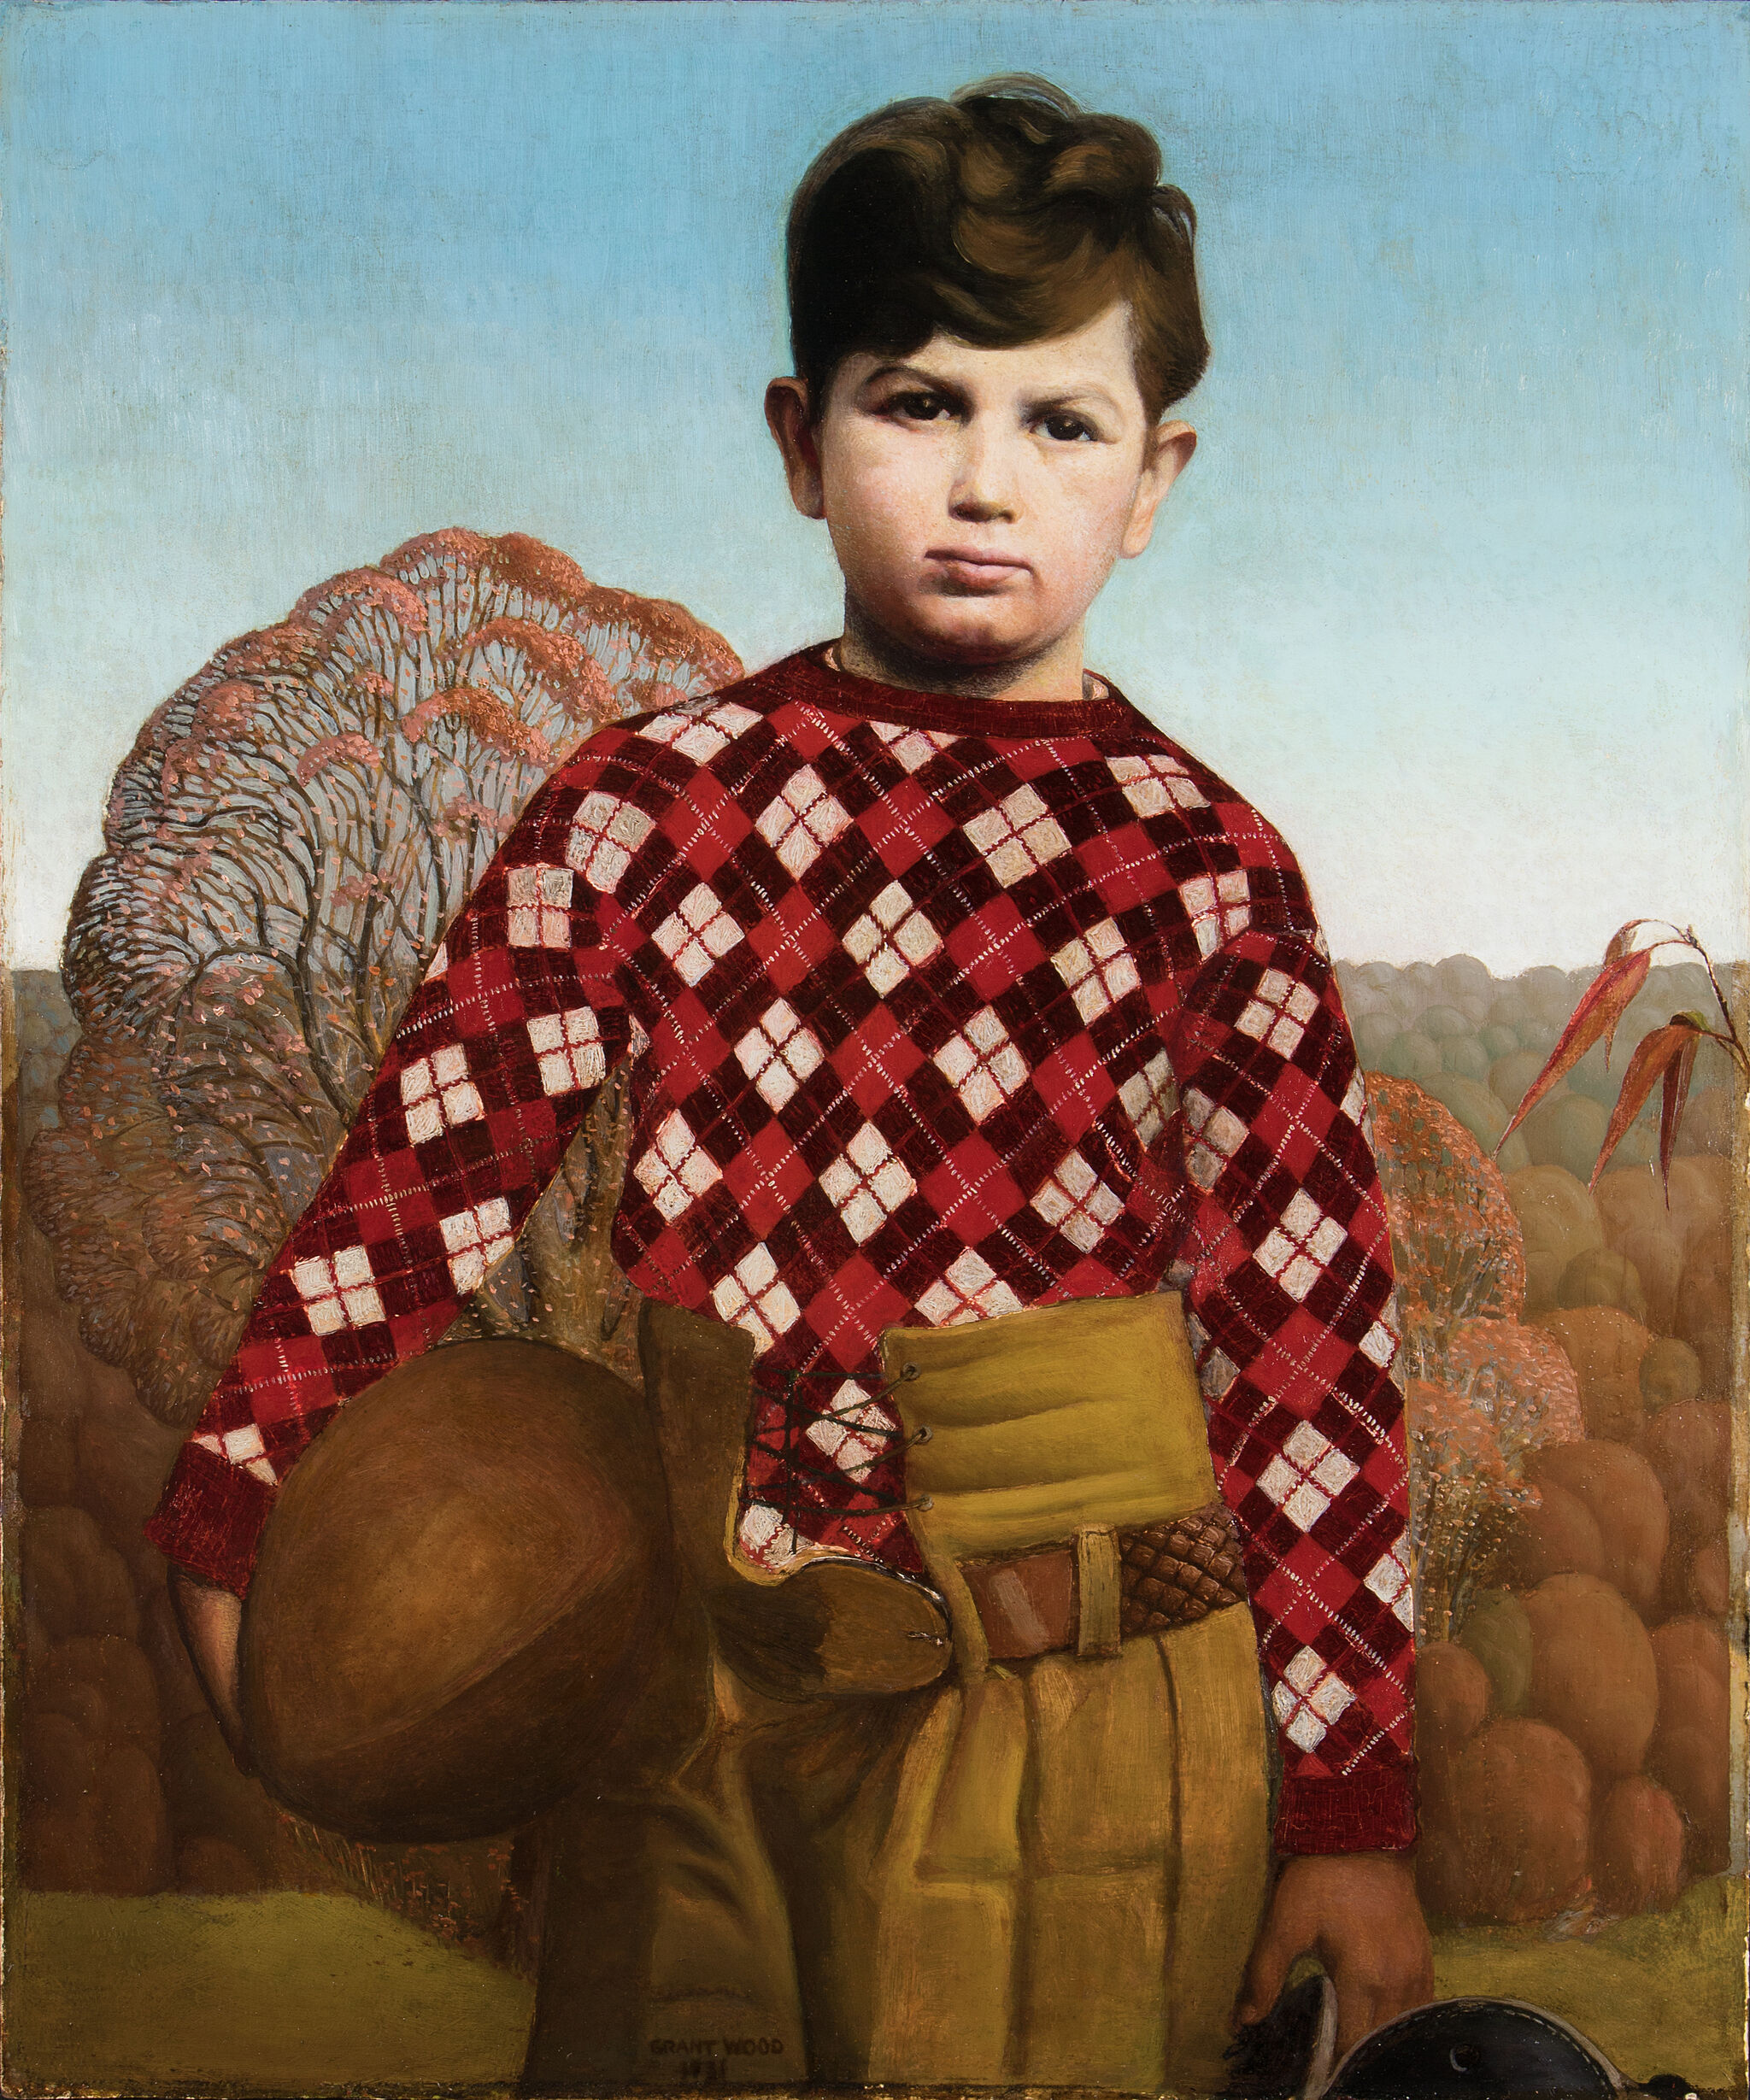 Portrait of a boy in a plaid sweater.